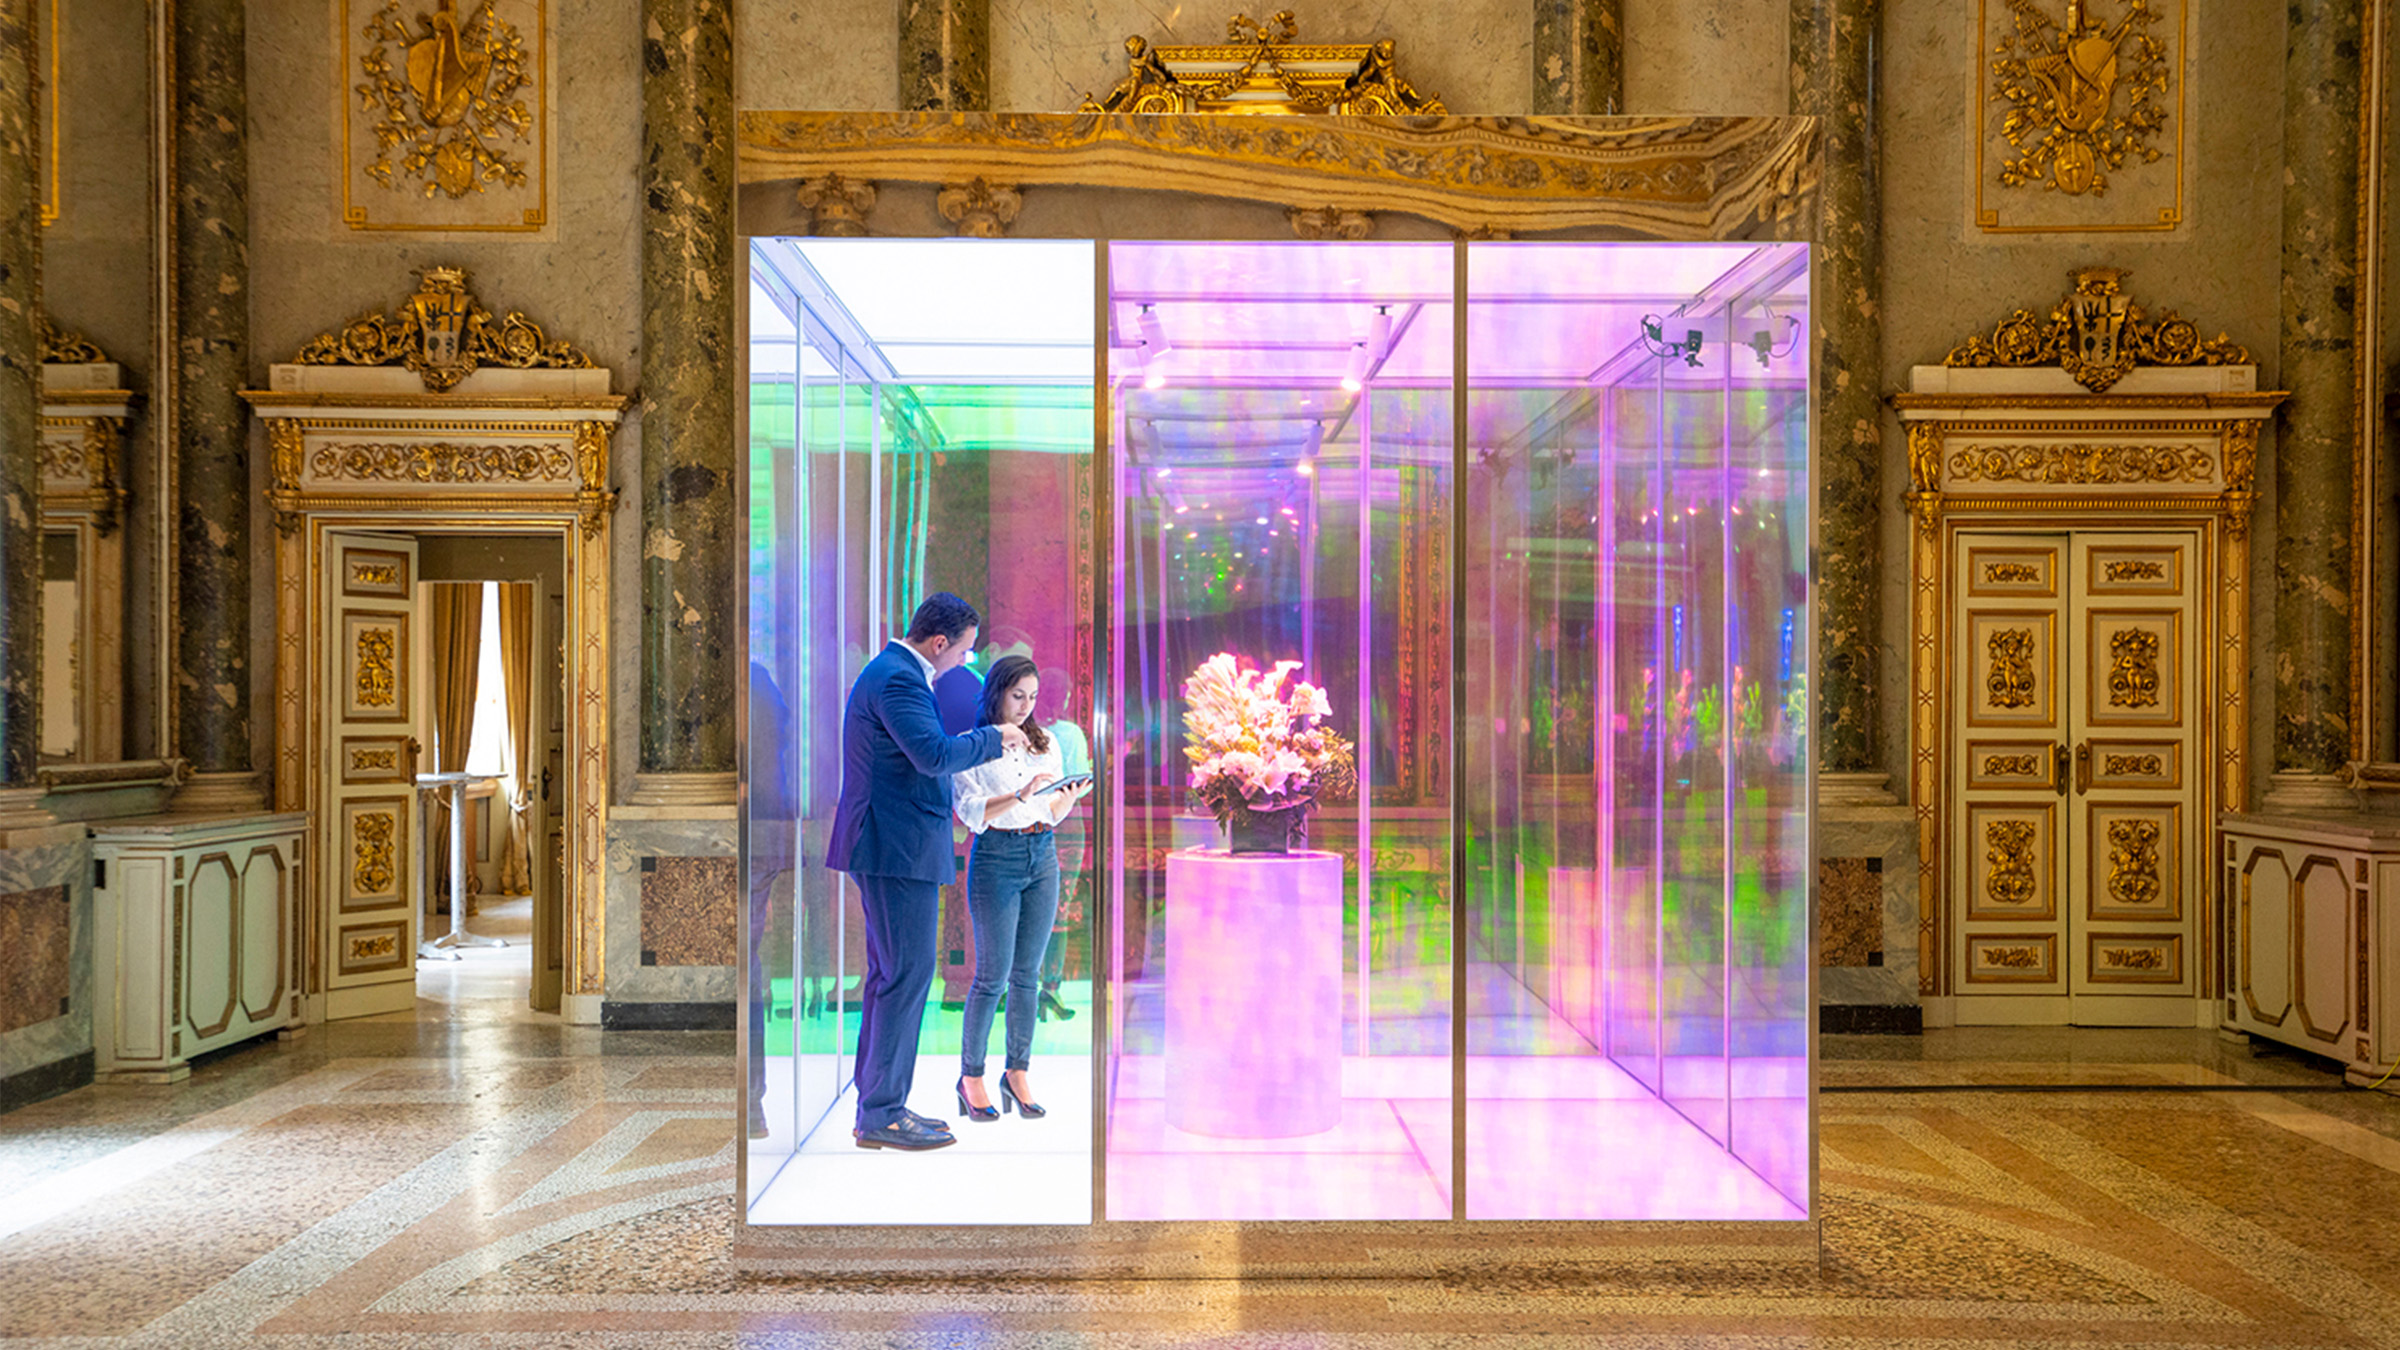 People in a glass cube in the middle of a baroque palace chamber surrounded by gilded, elaborately carved woodwork and terrazzo flooring.